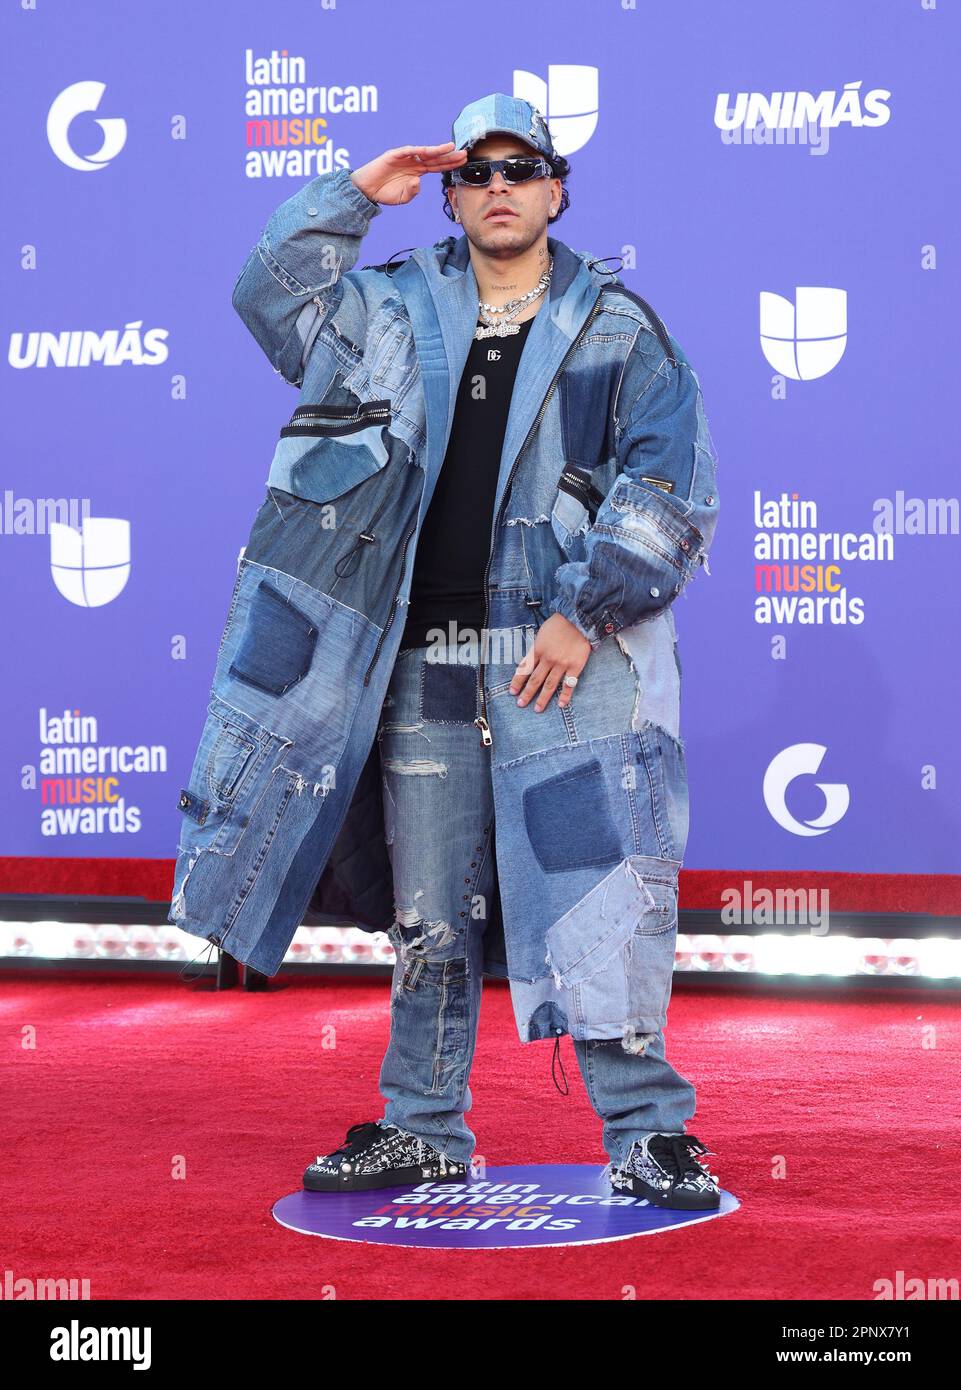 Latin American Music Awards 2022: Date, Time and Location